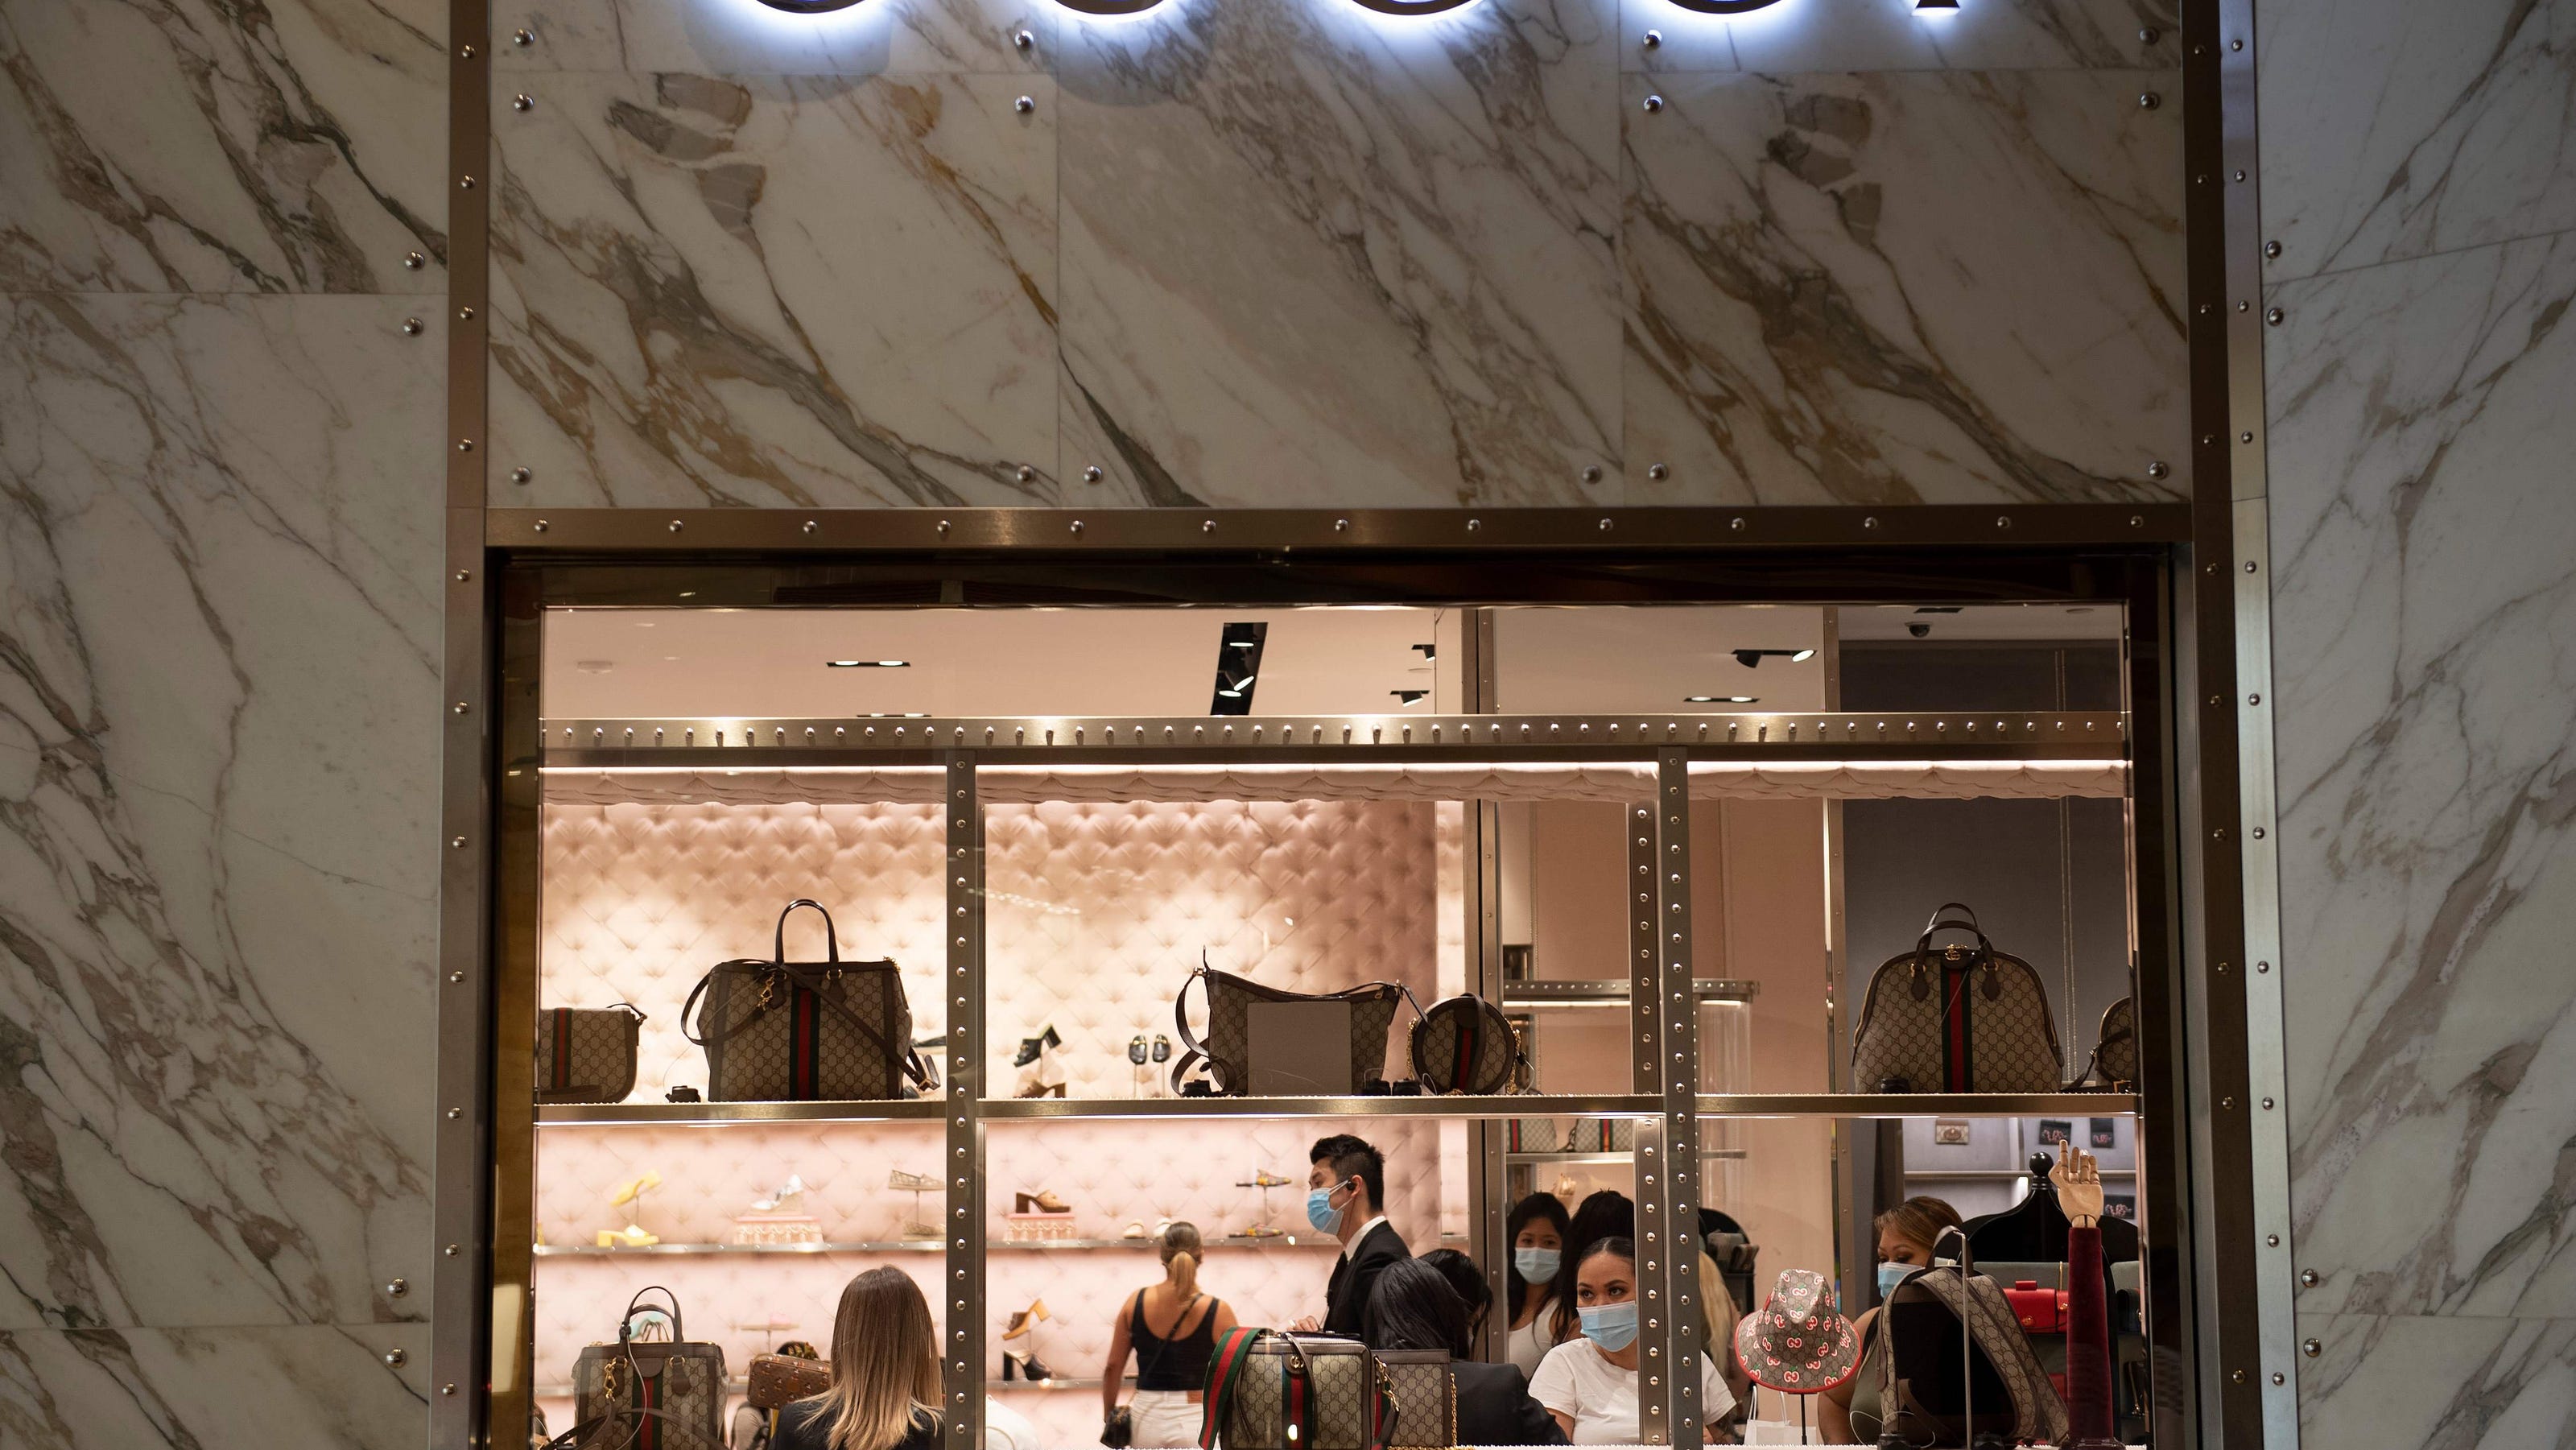 Gucci, Big Woods, Hard Truth Distilling, Levi's coming to Fashion Mall